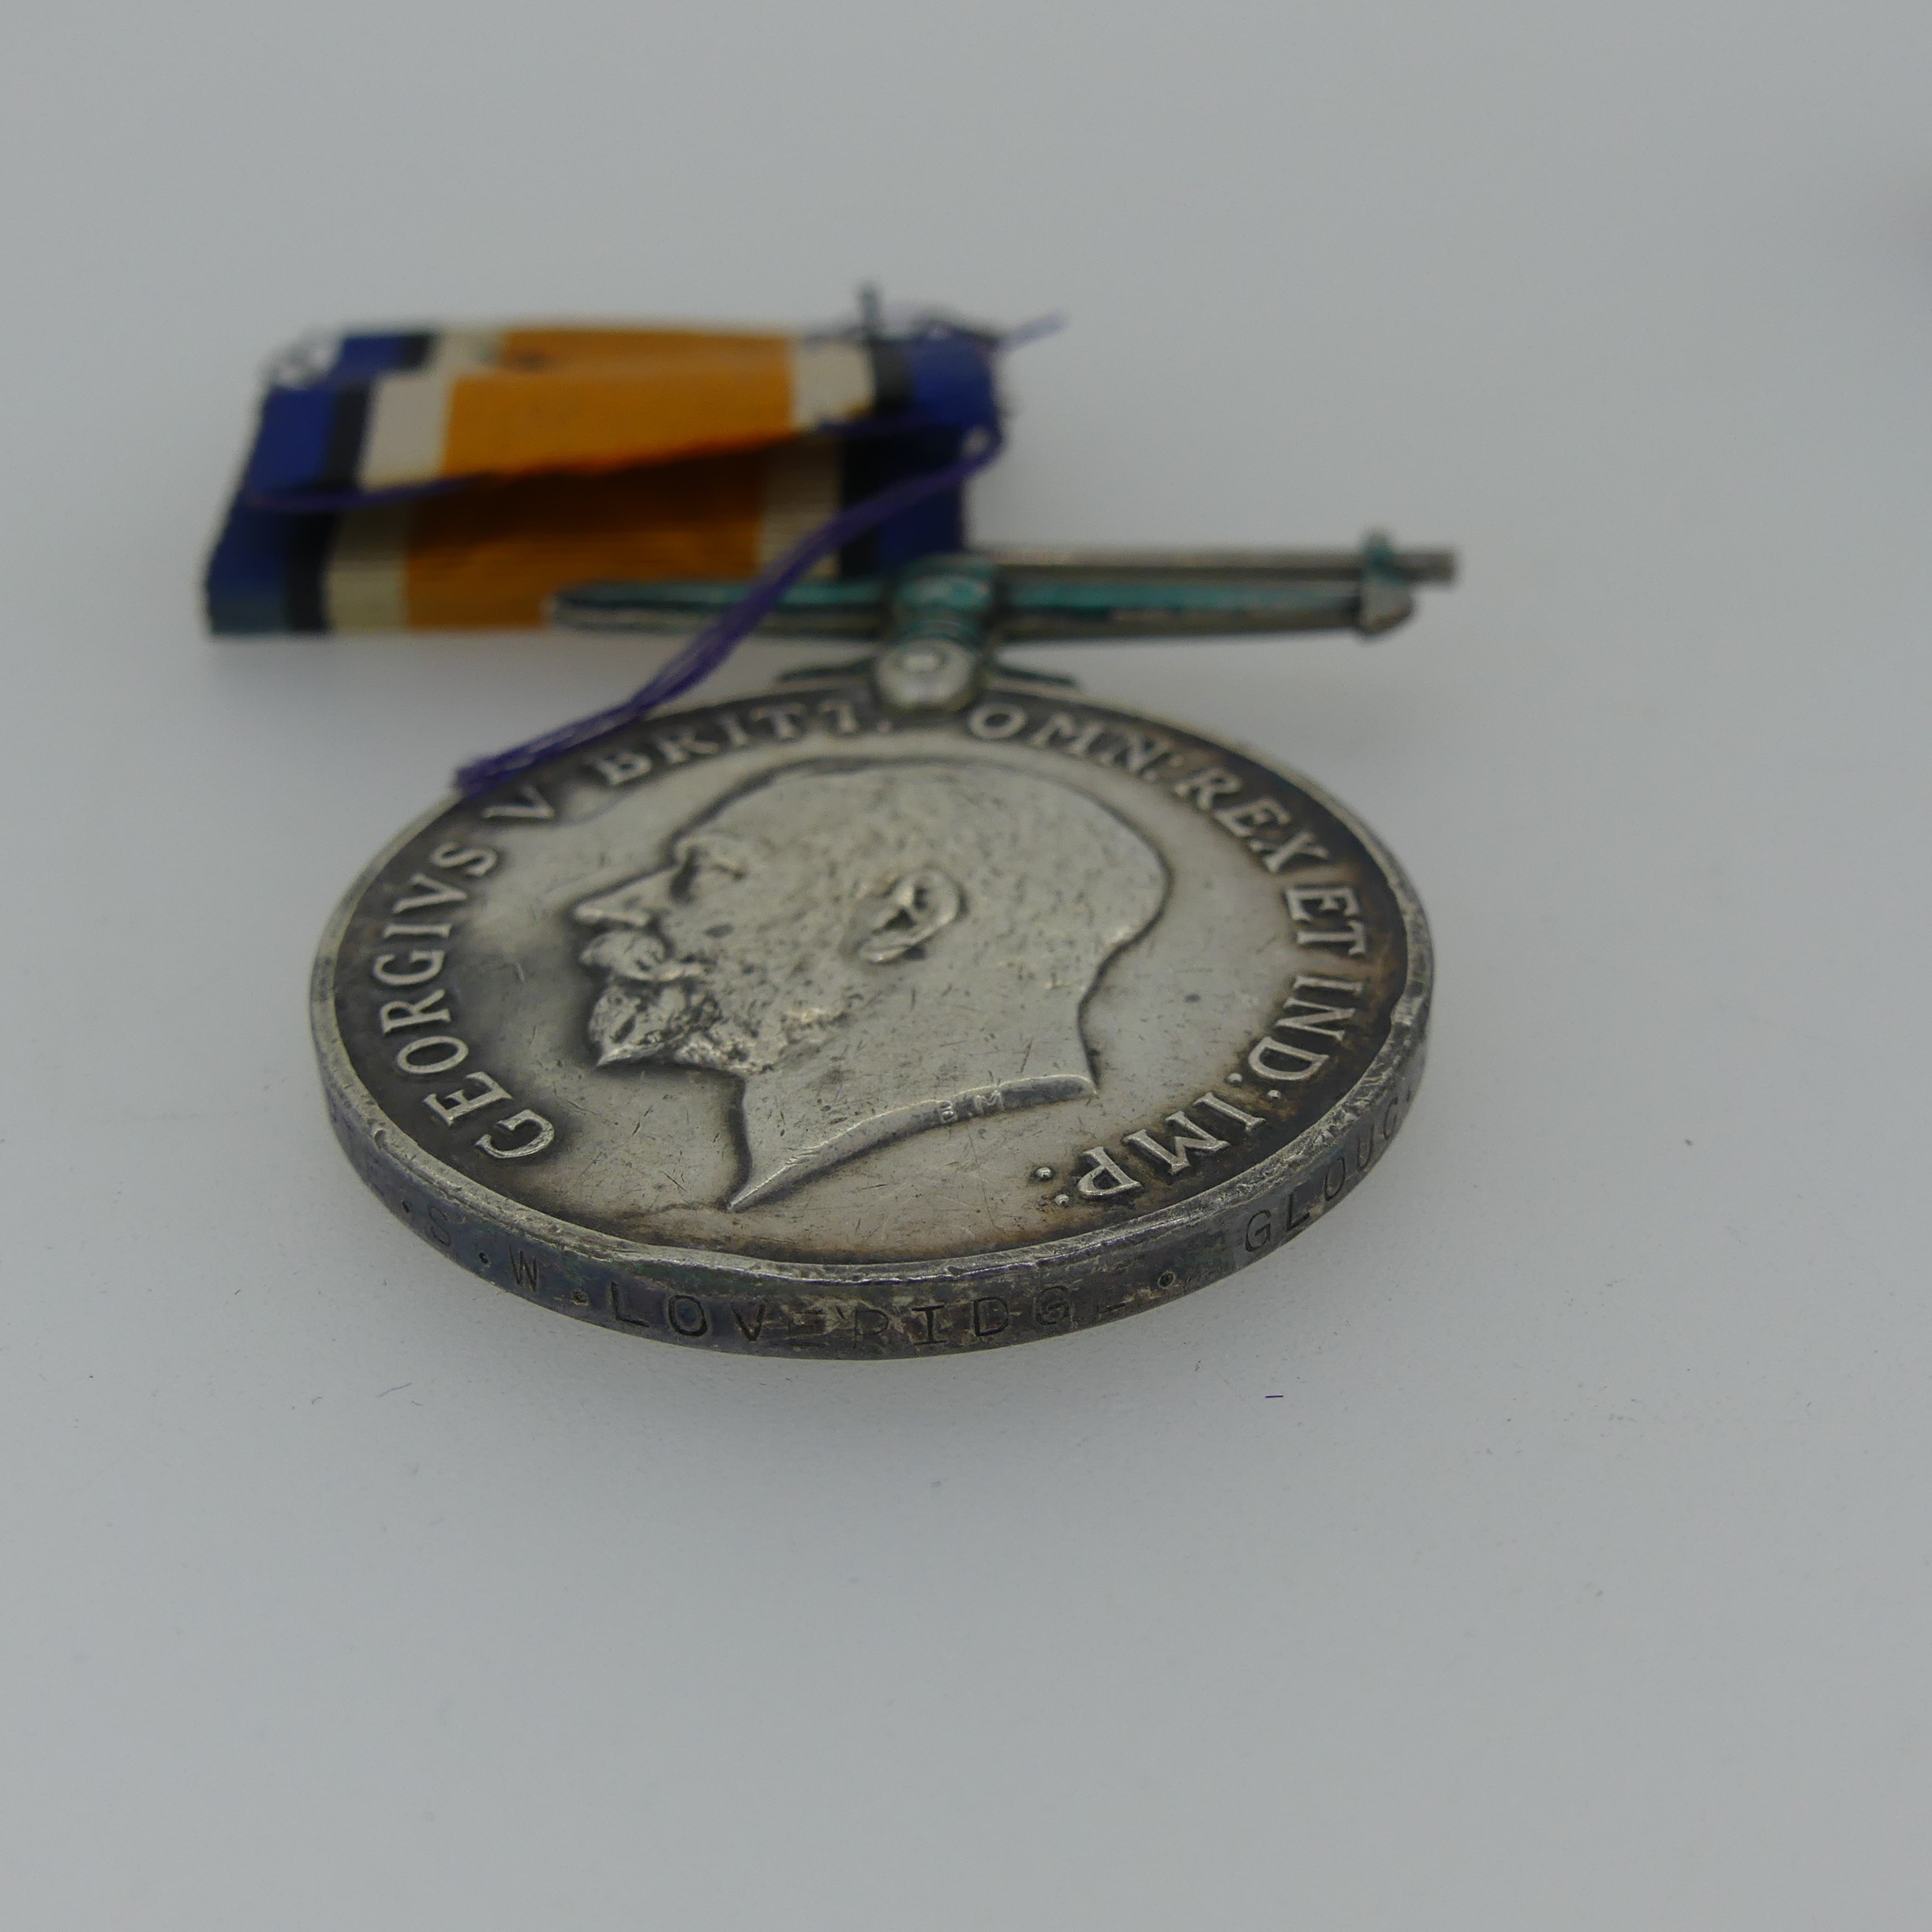 British War Medals (4) 52224 Pte. B Davies RAMC (some edge knocks and pitting) 25314 Pte W.T. Deacon - Image 6 of 6